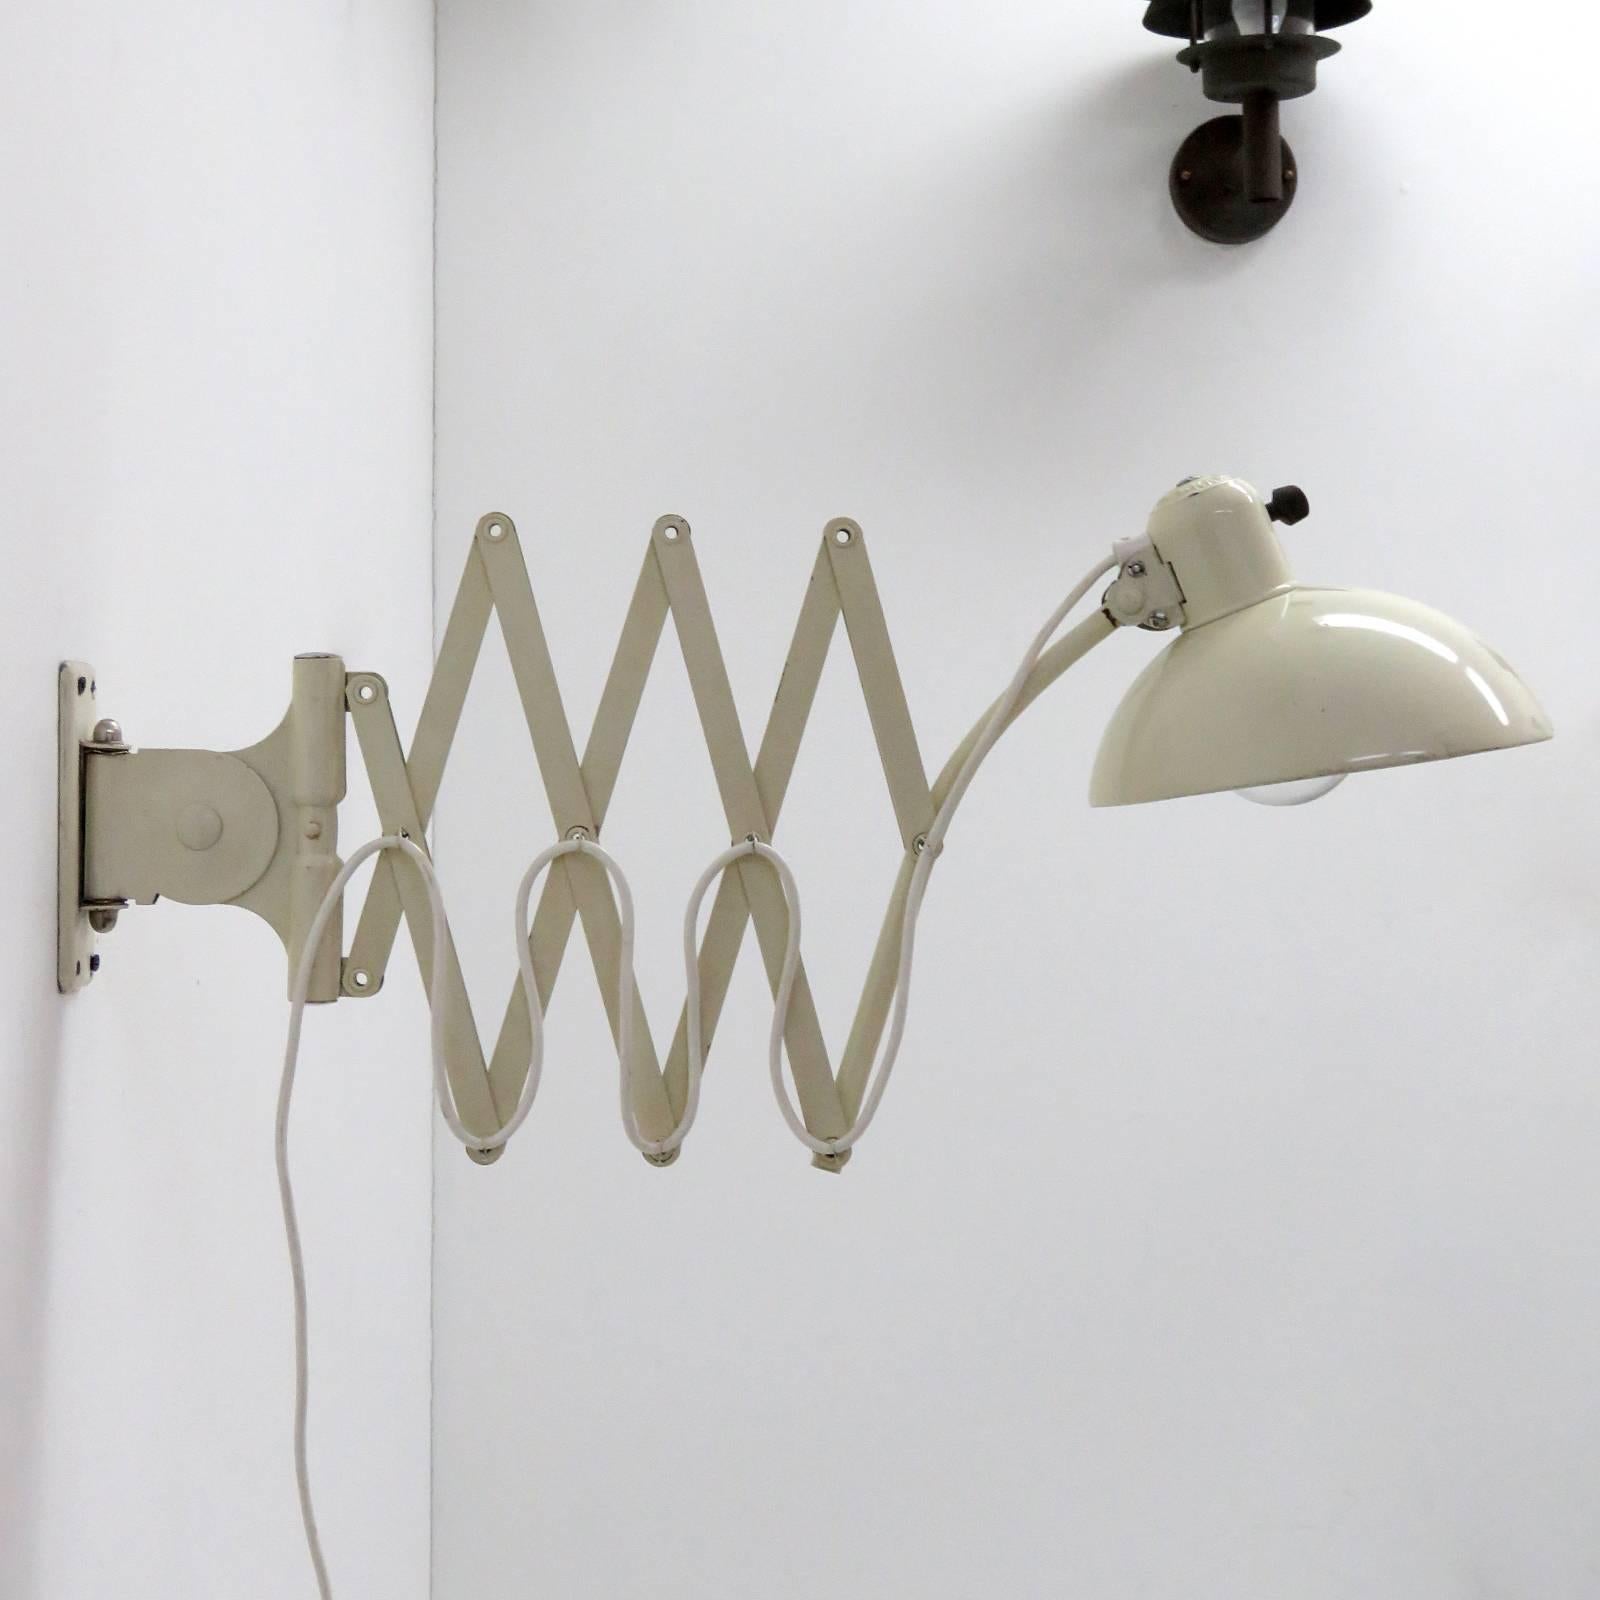 Large wall scissors lamp by Christian Dell for Kaiser Idell, 1933, off-white model No. 6614, maximum cantilever, 49